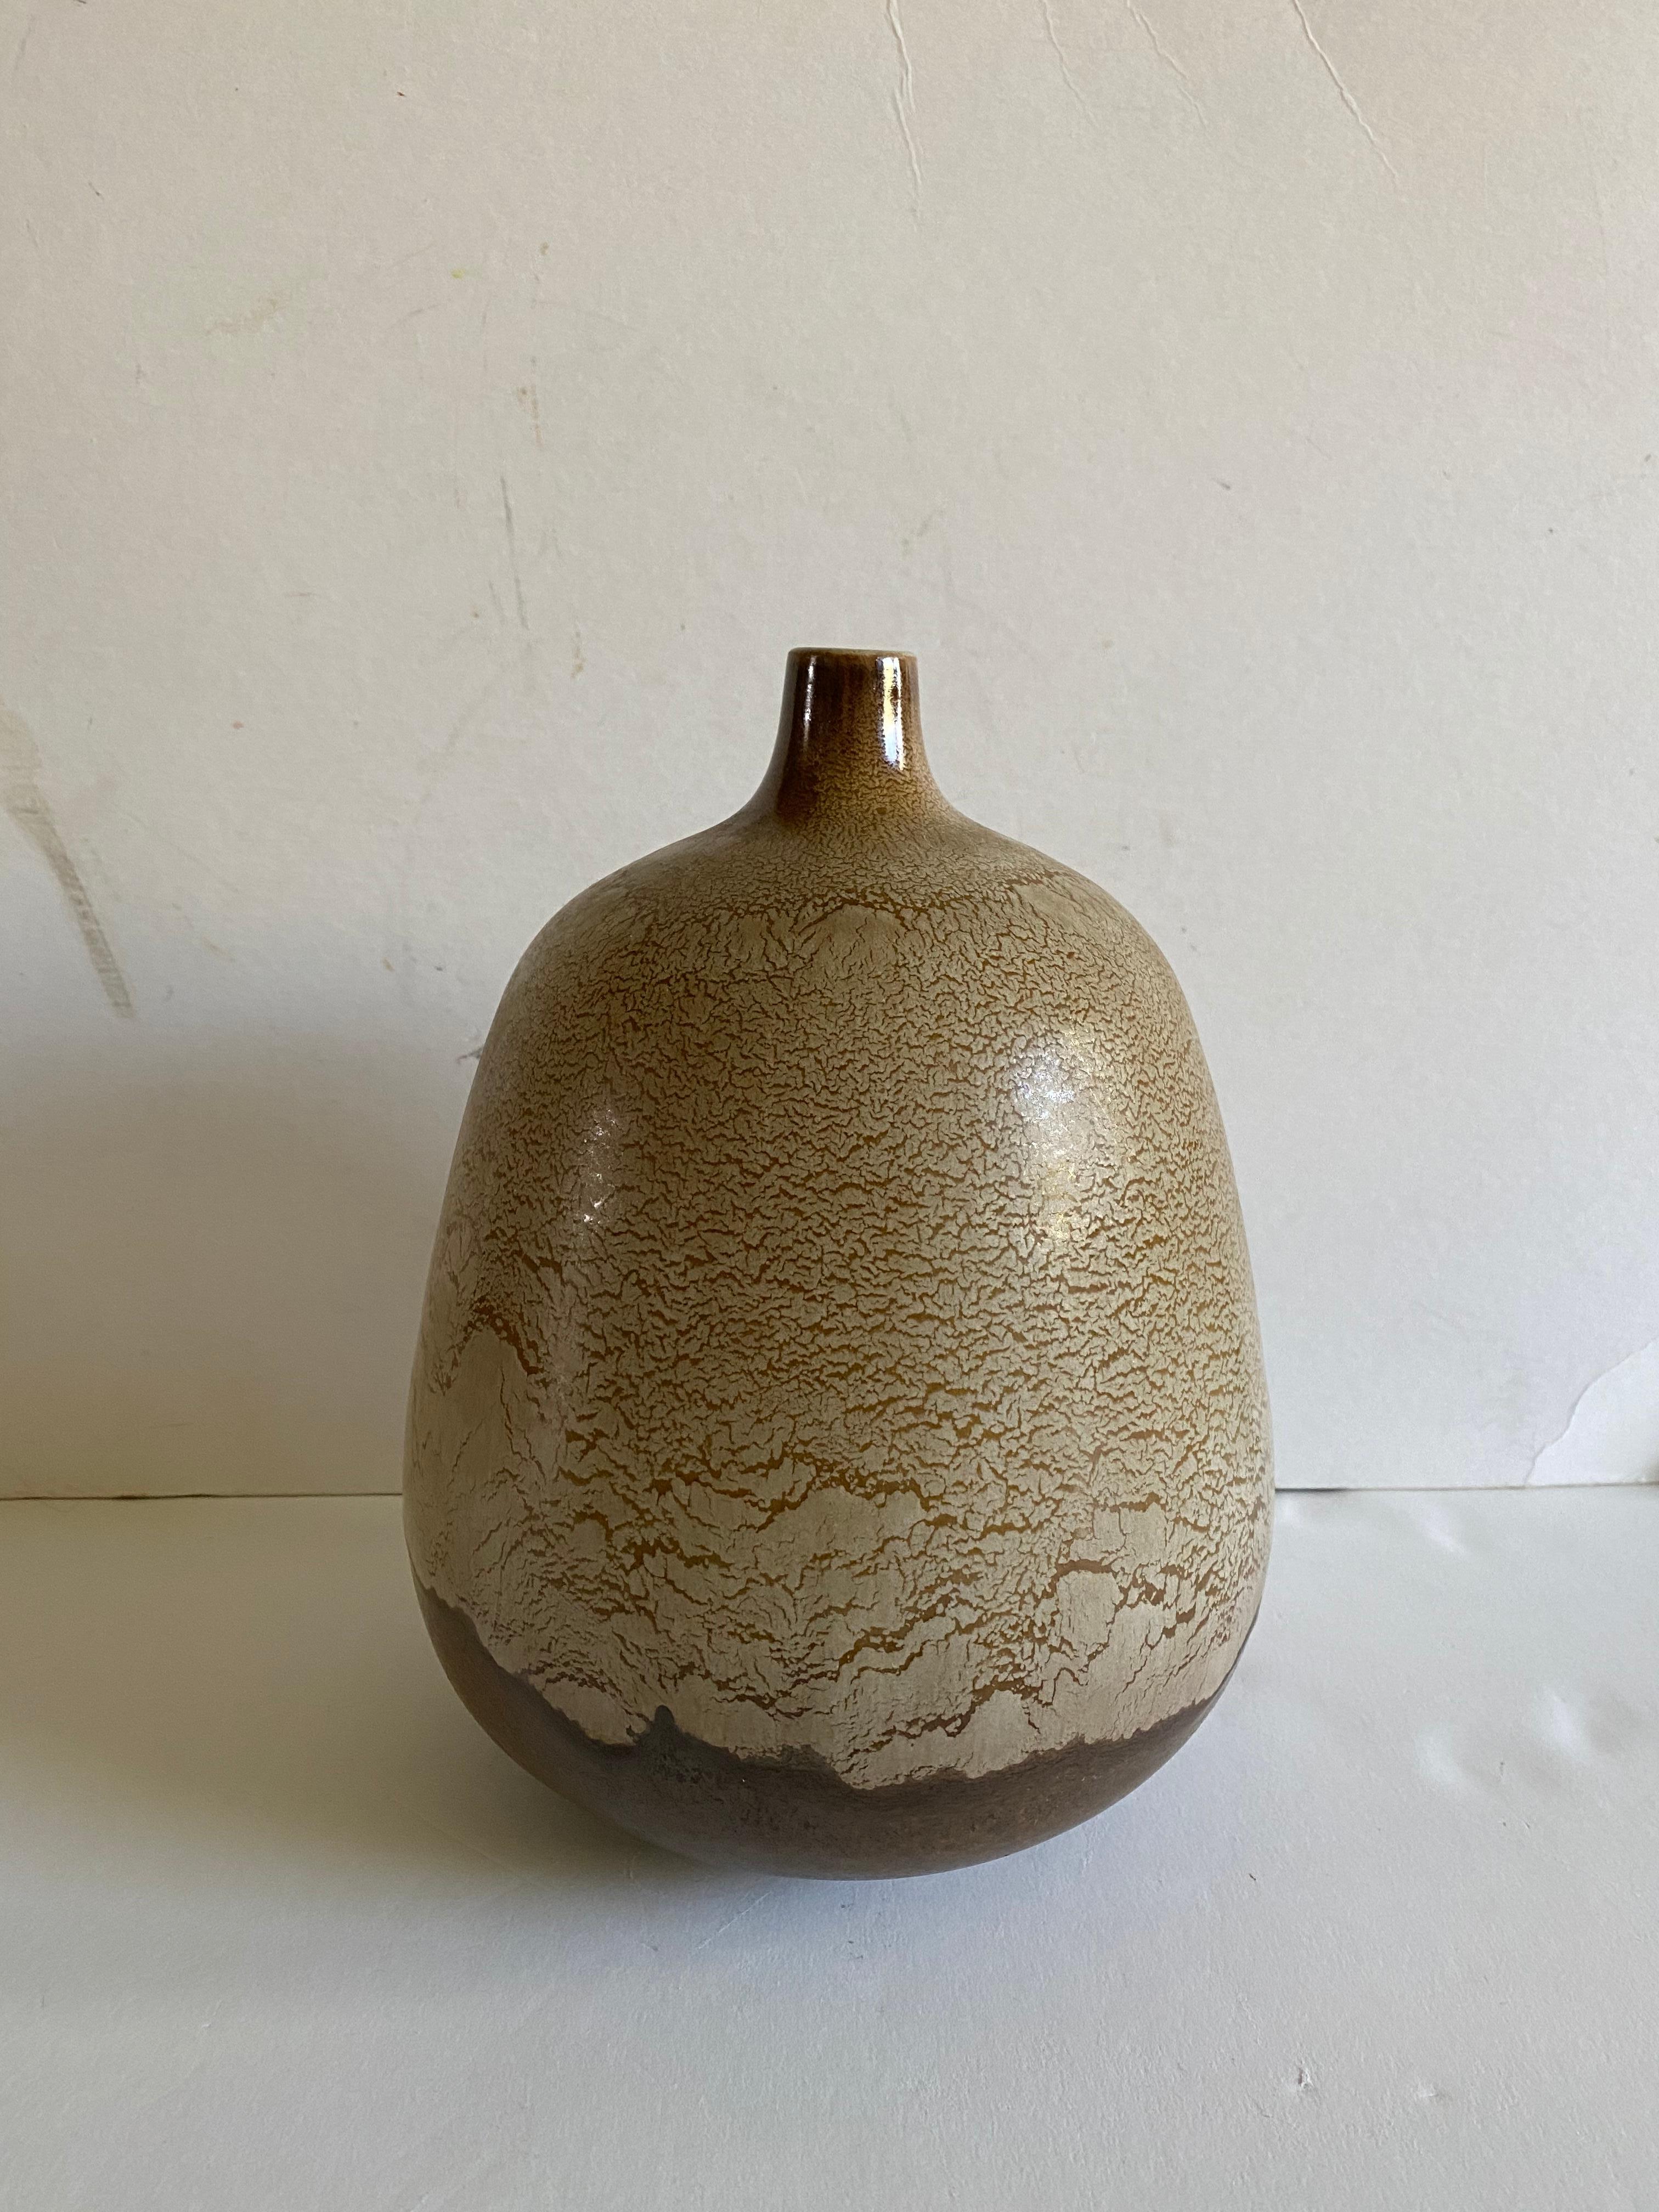 An earthtone ceramic vase by Alvino Bagni for Raymor. Italy, circa 1950.

Marked “Italy” on base. 

Dimensions: 10 inches H x 7.5 inches W (at widest point).